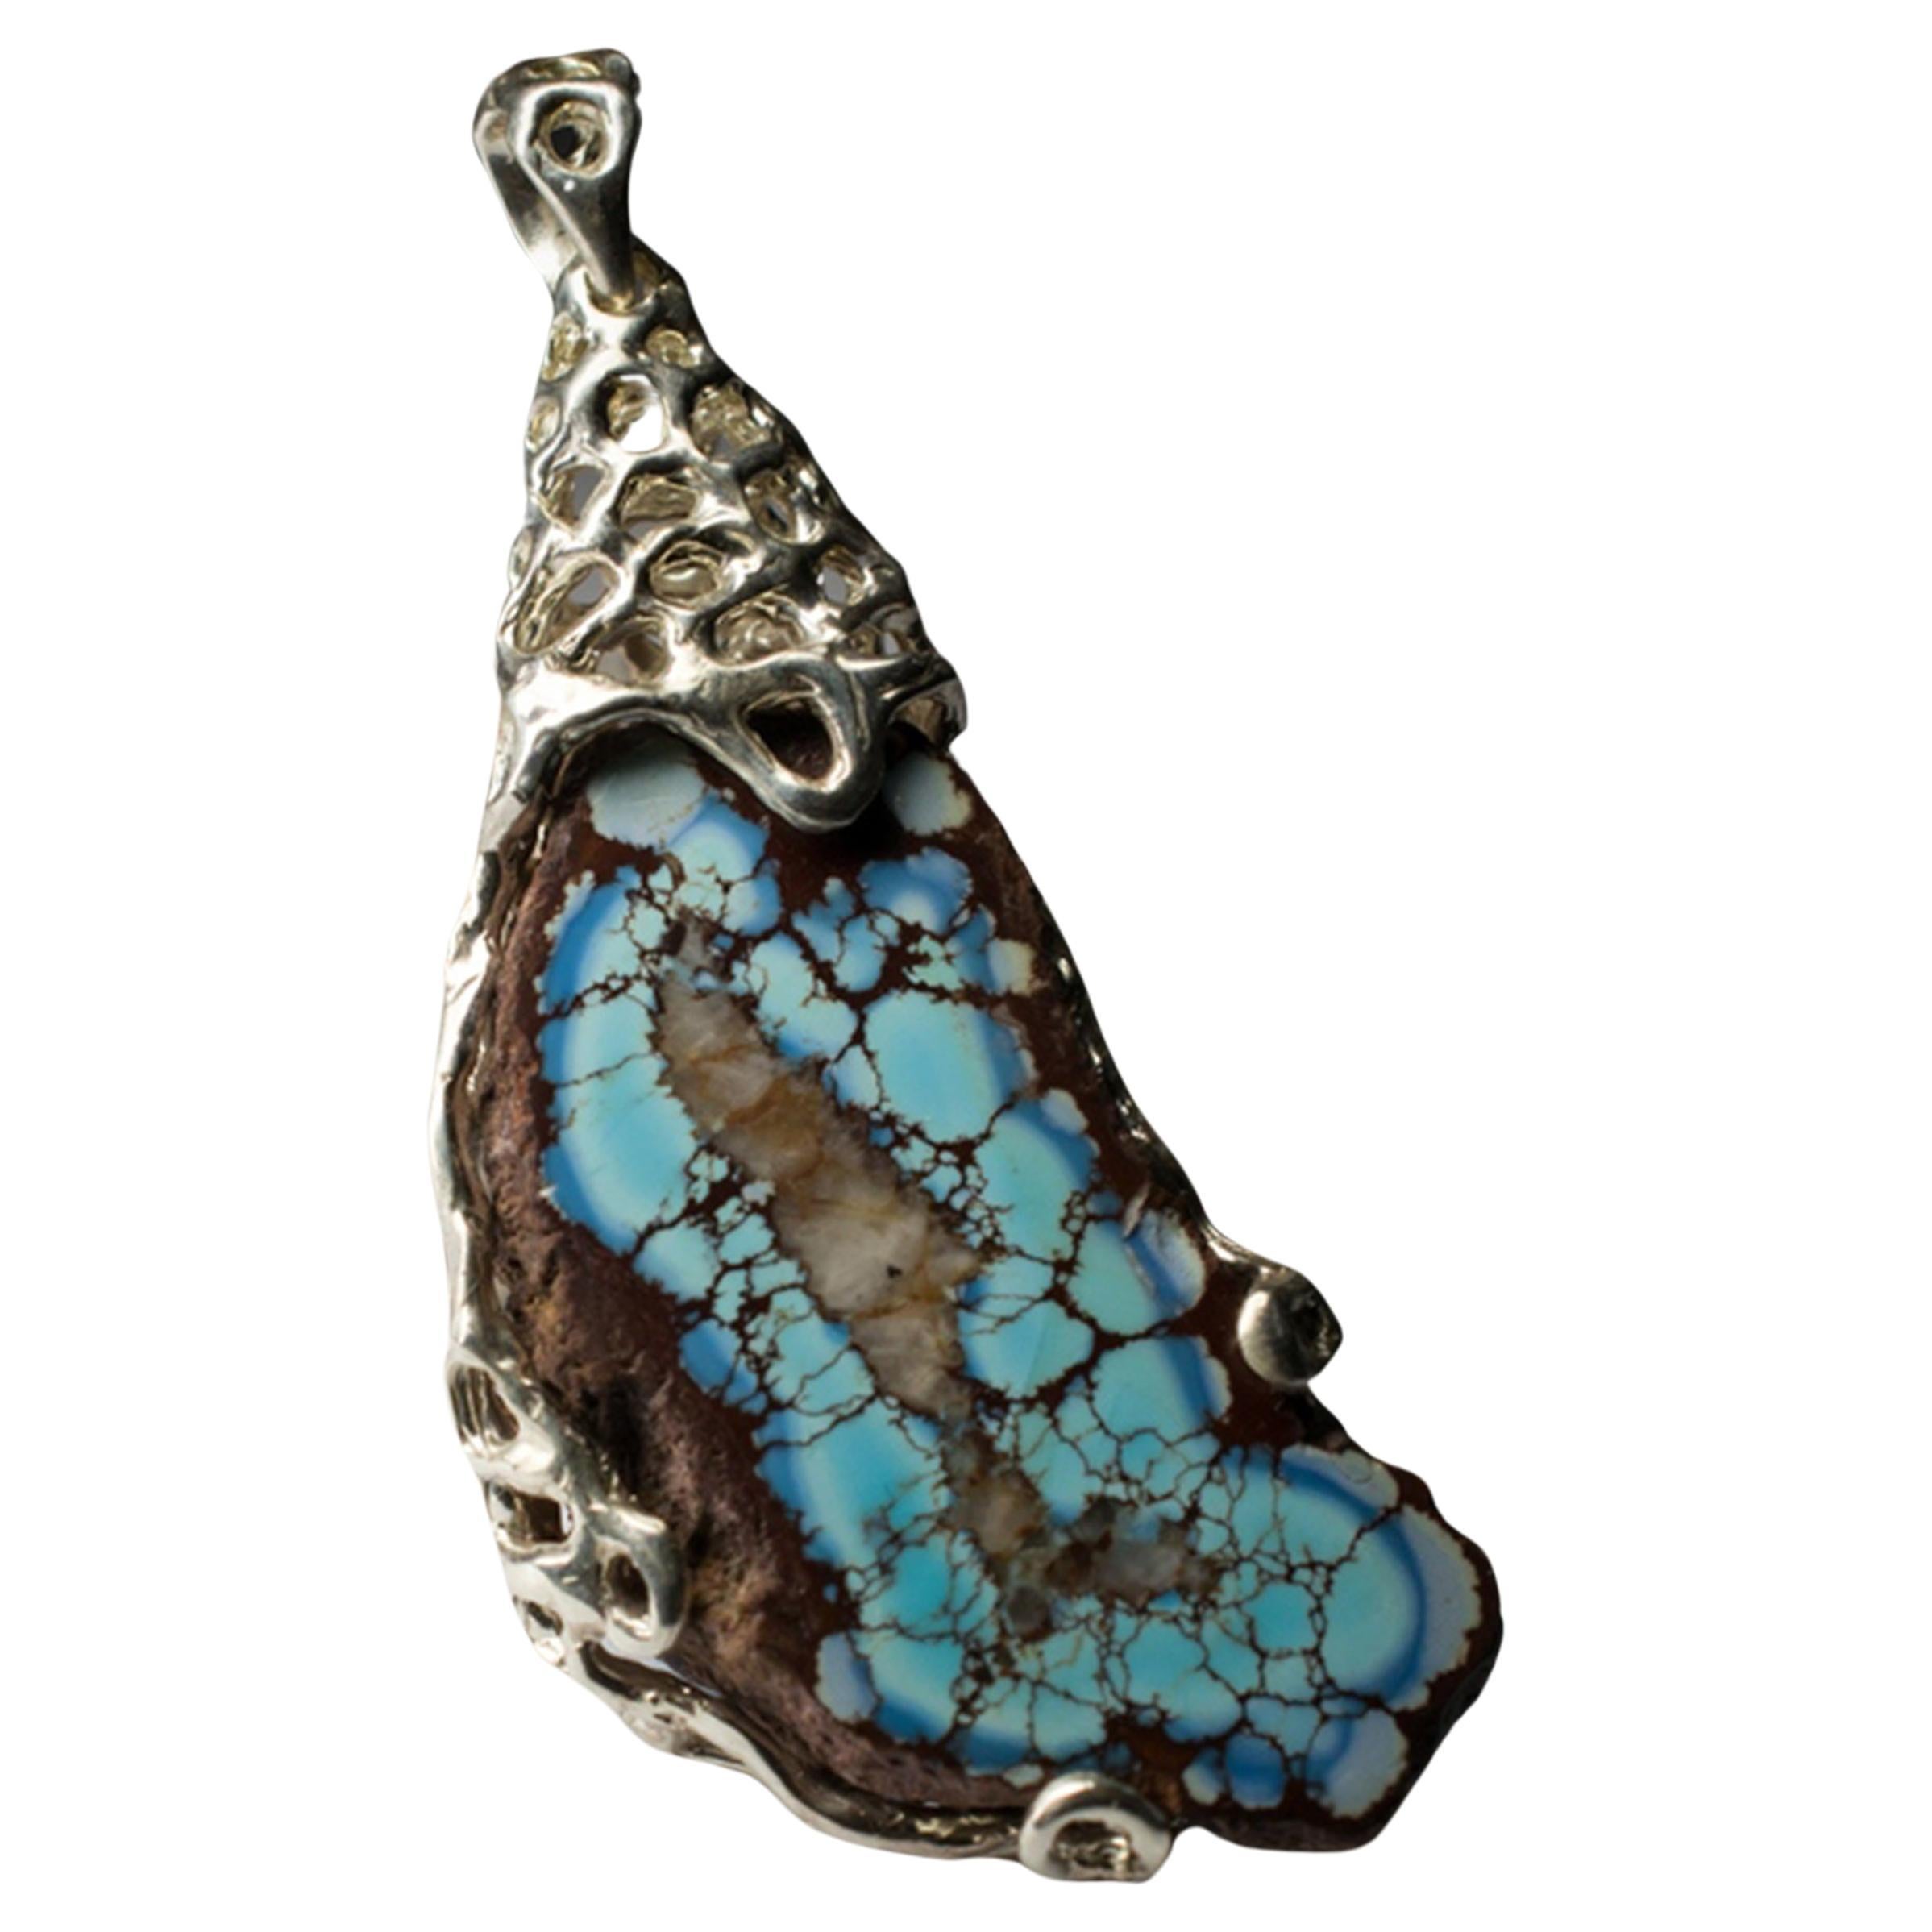 Turquoise Silver Pendant Raw Uncut Polychrome Patterned Natural Vintage Gemstone For Sale